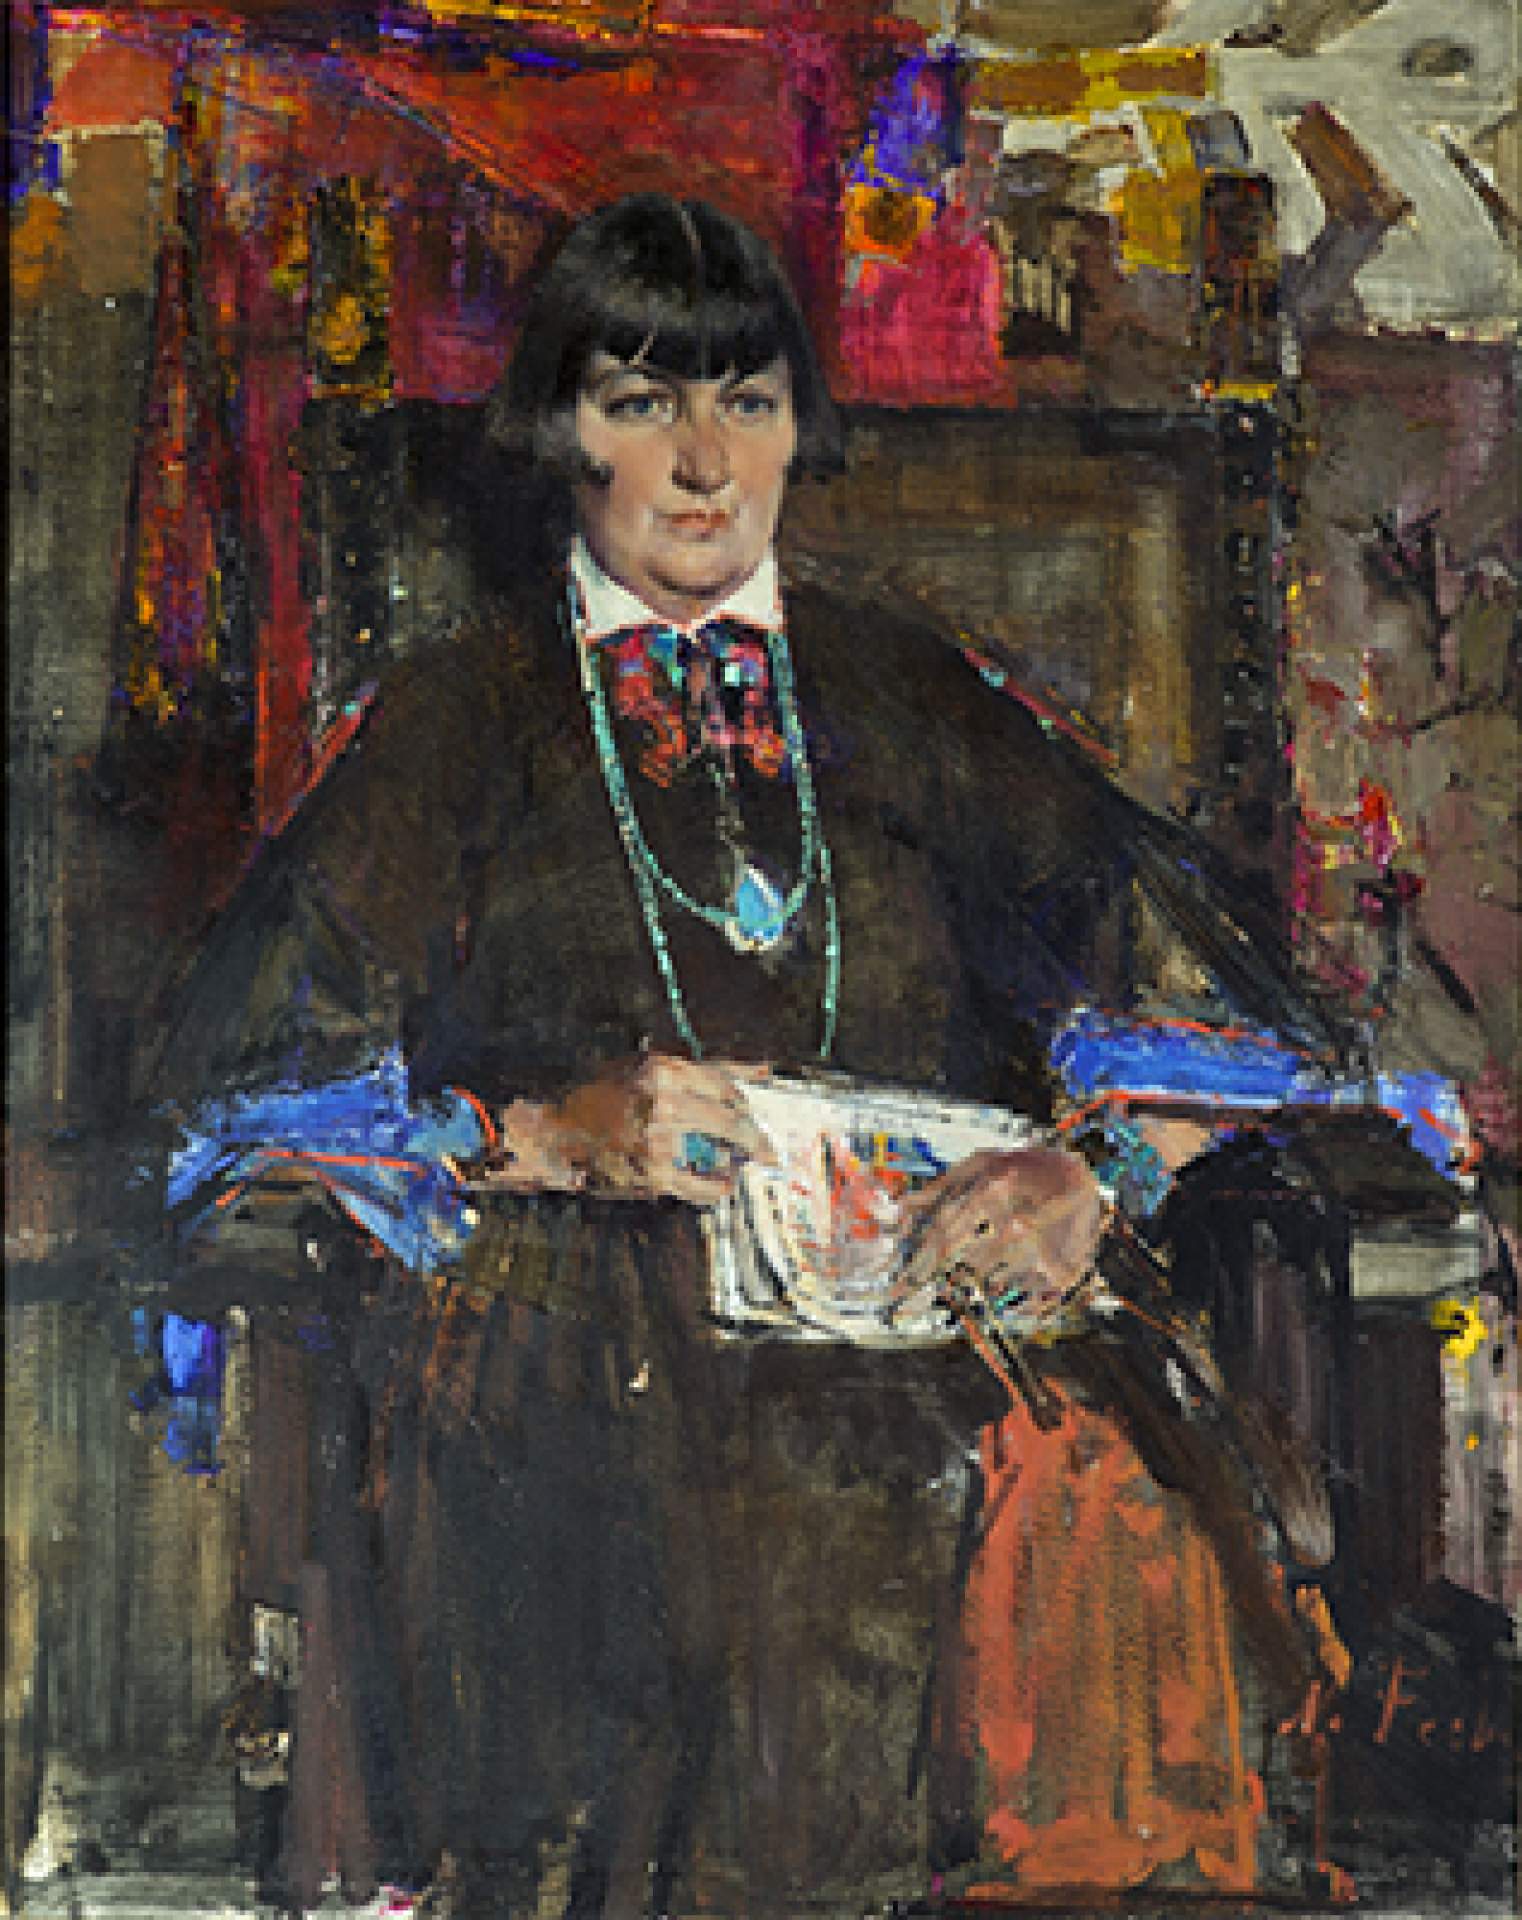 Mabel Dodge Luhan show an ambitious project at Taos’ Harwood Museum